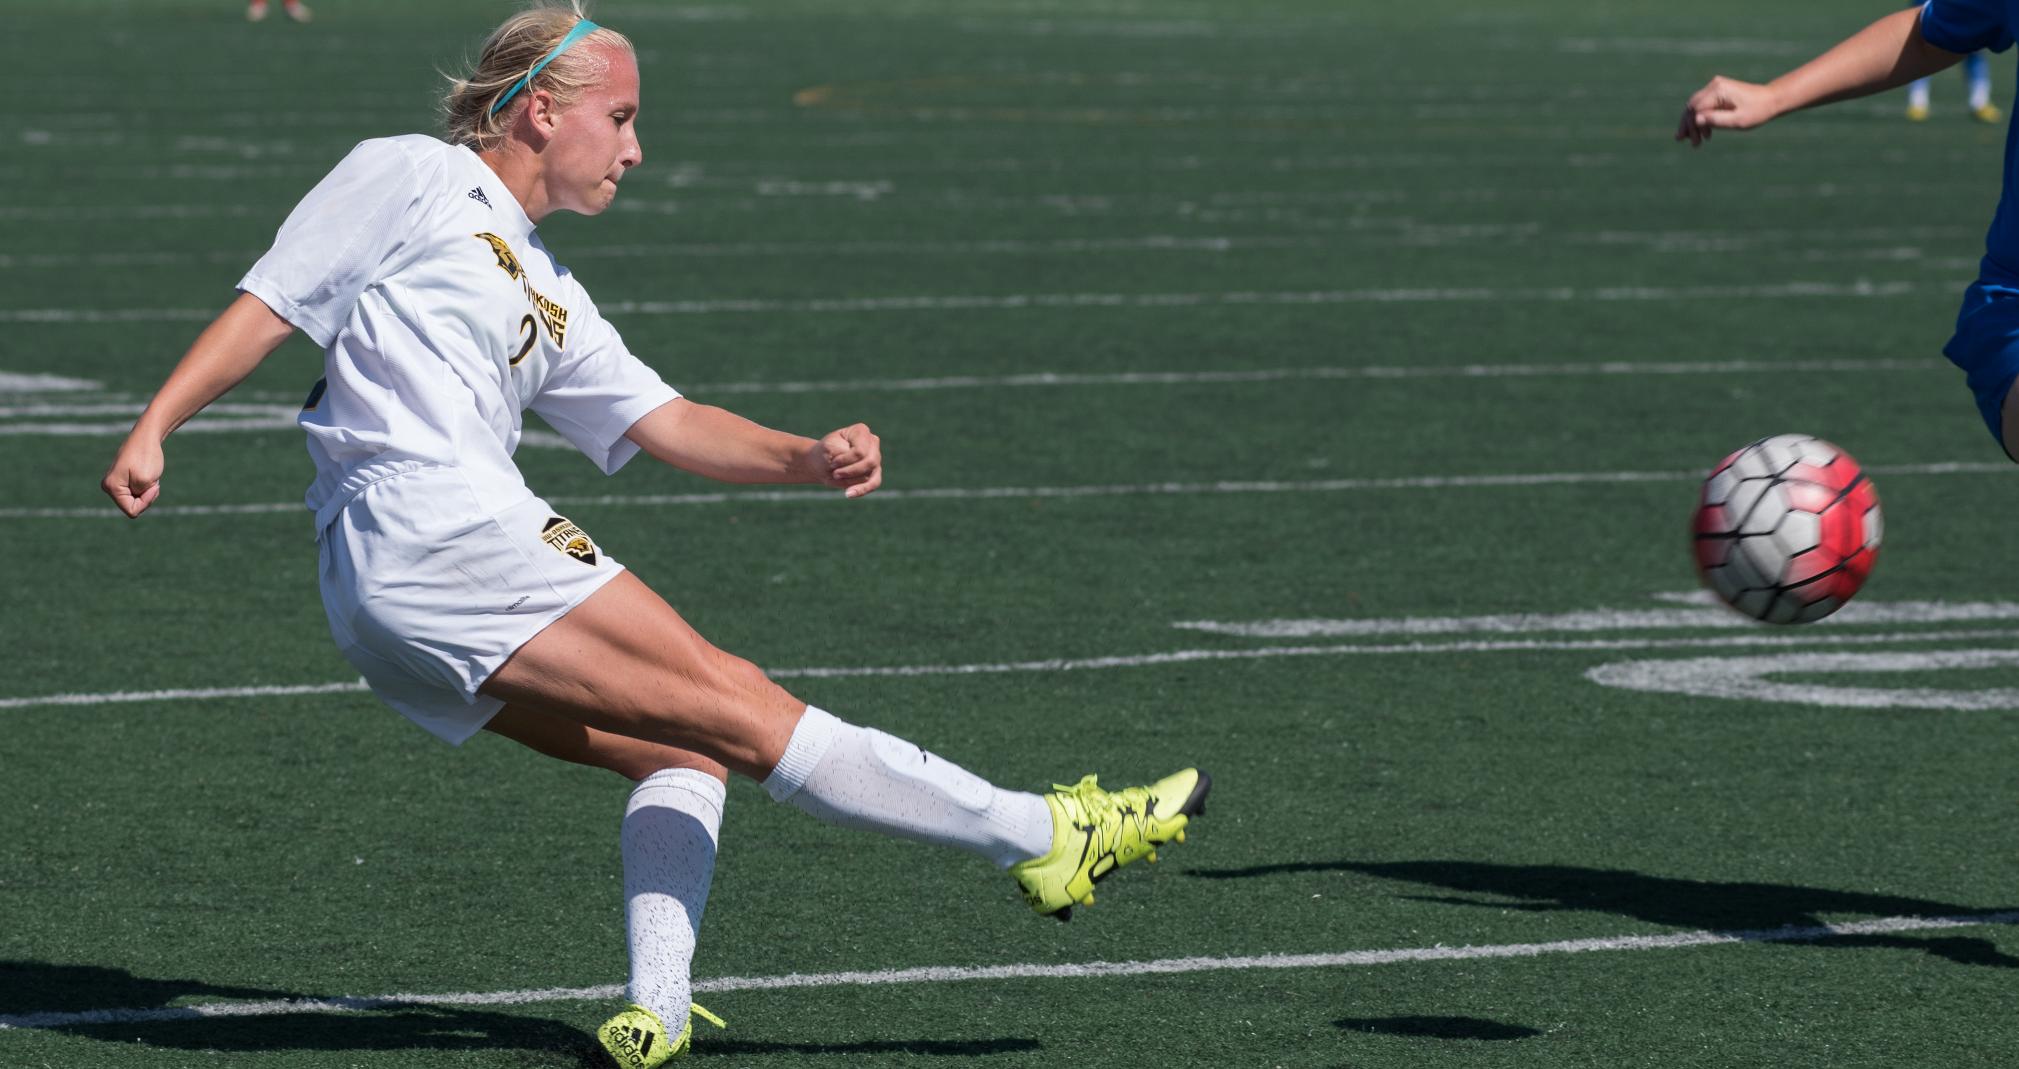 Alek Kleis gave UW-Oshkosh its sixth straight win over UW-Eau Claire with her goal in the 73rd minute.